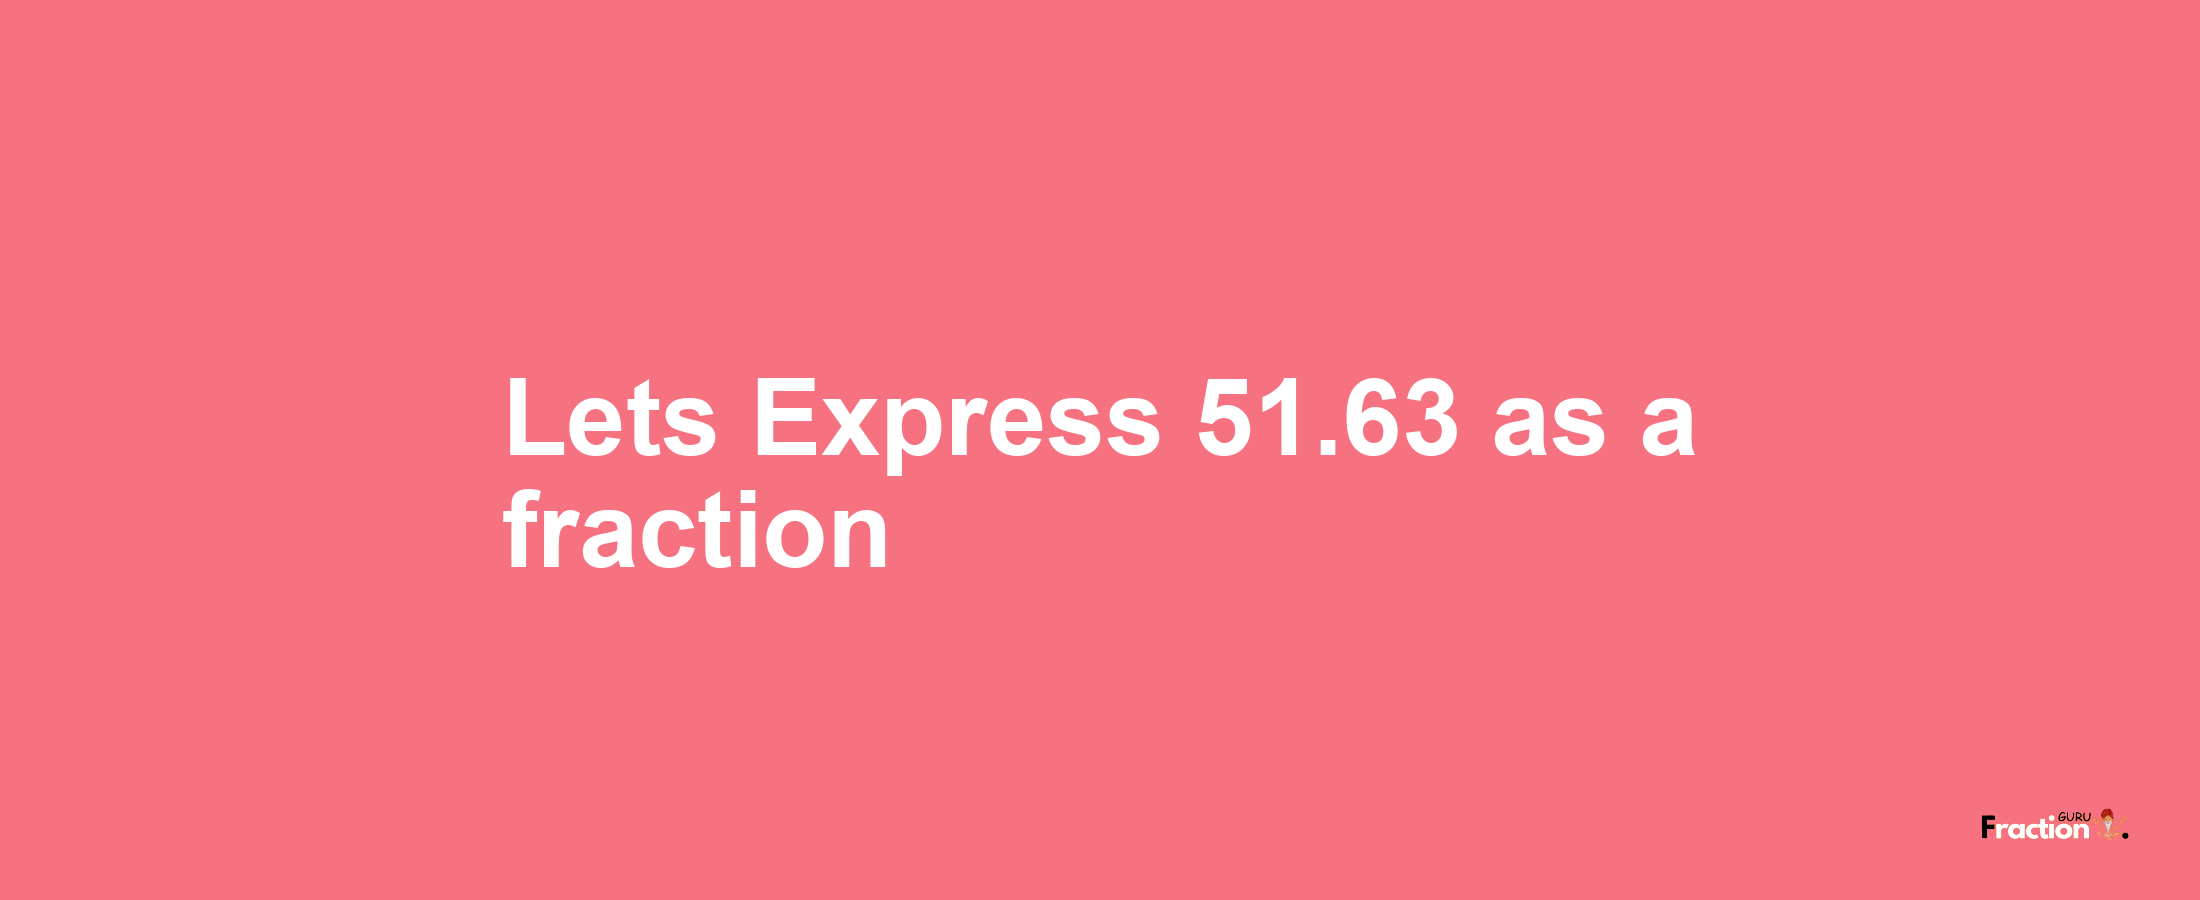 Lets Express 51.63 as afraction